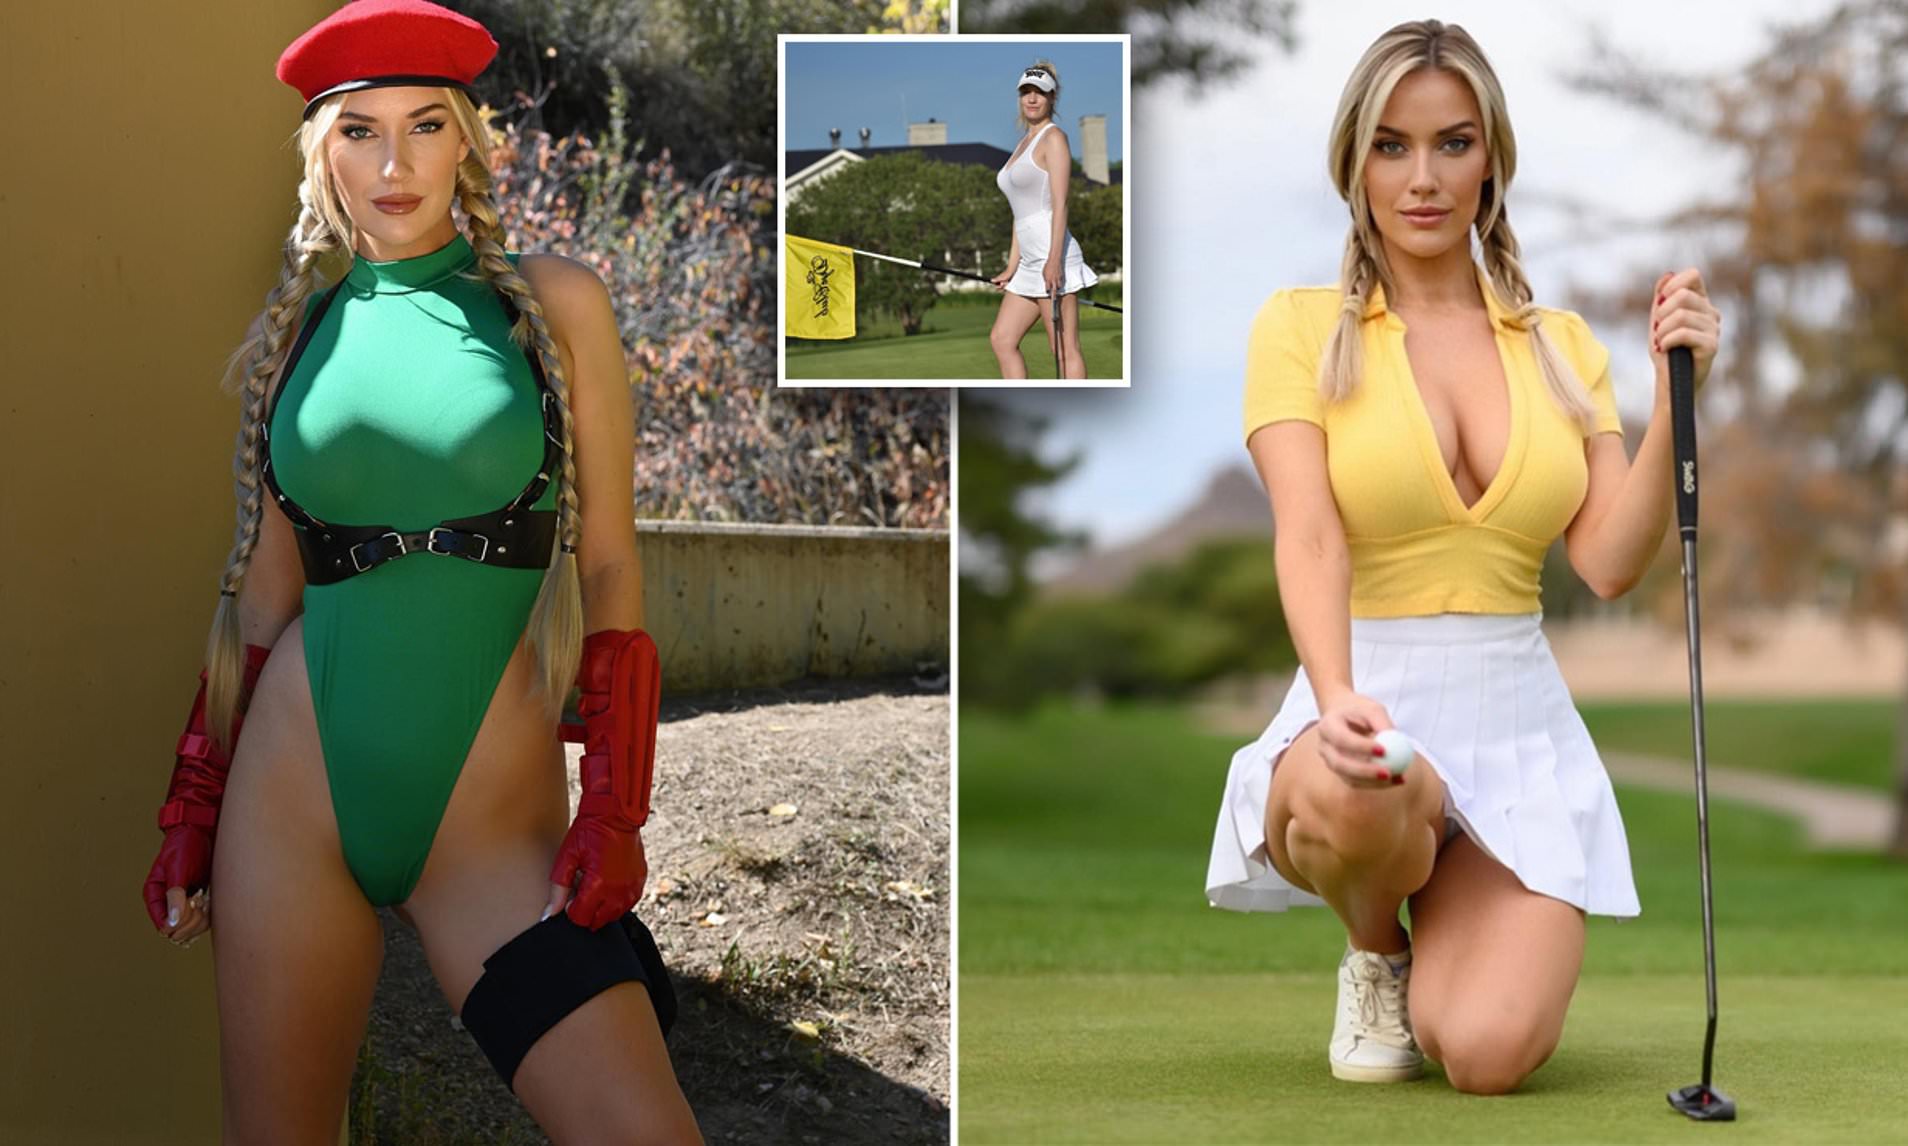 Photo: sexy golf bets with wife